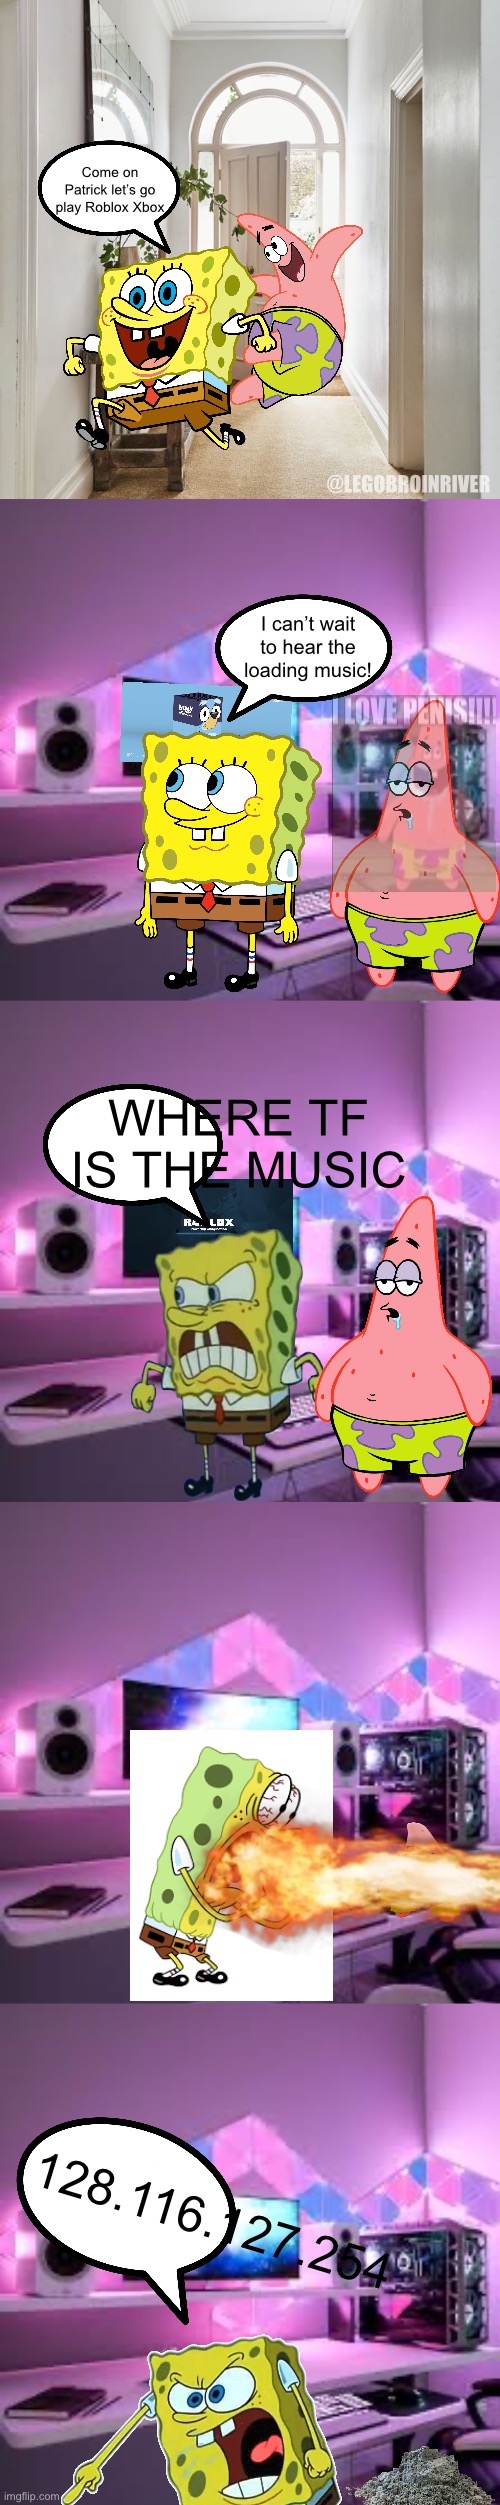 SpongeBob meme | Come on Patrick let’s go play Roblox Xbox; @LEGOBROINRIVER; I can’t wait to hear the loading music! WHERE TF IS THE MUSIC; 128.116.127.254 | made w/ Imgflip meme maker